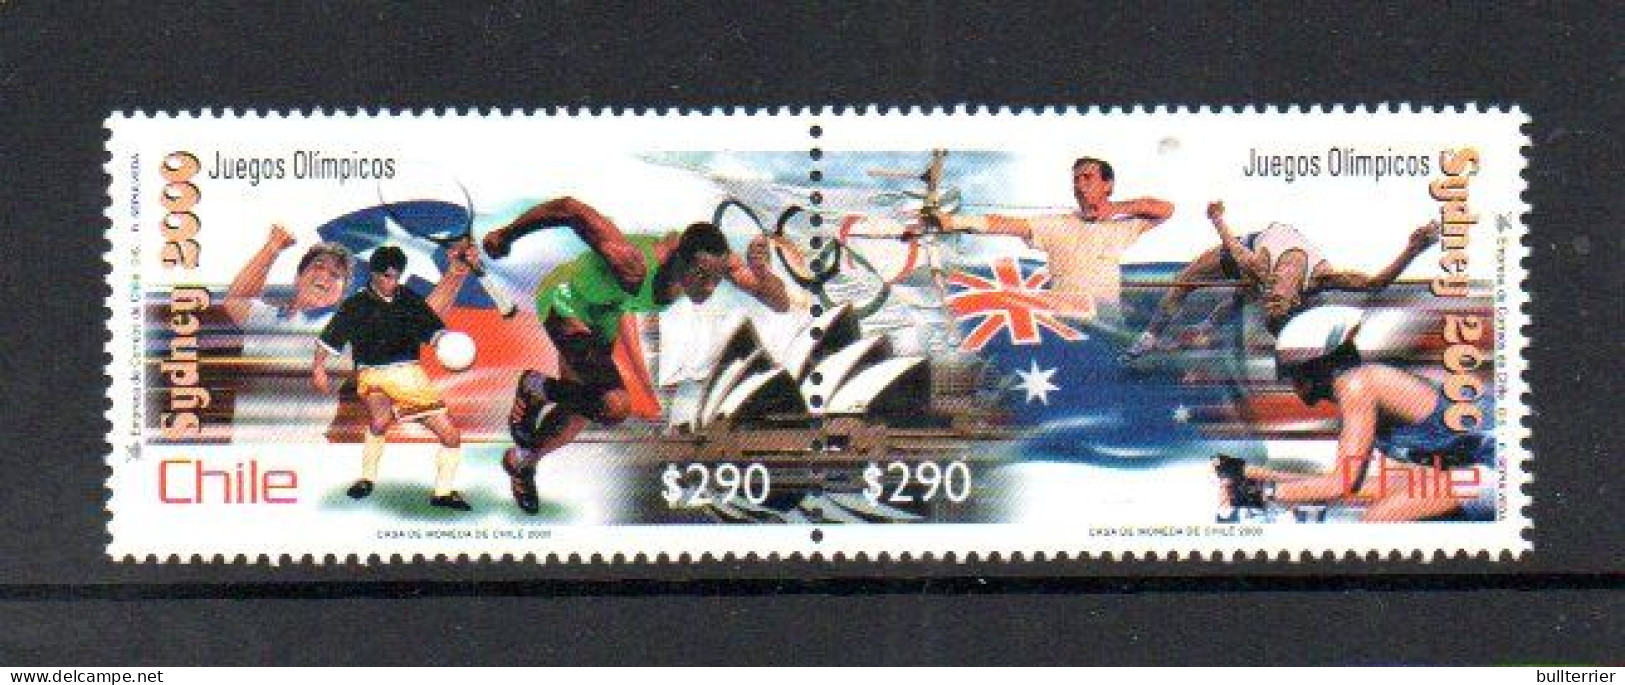 OLYMPICS - CHILE   -  2000 SYDNEY OLYMPICS SET OF 2 IN PAIR   MINT NEVER HINGED - Estate 2000: Sydney